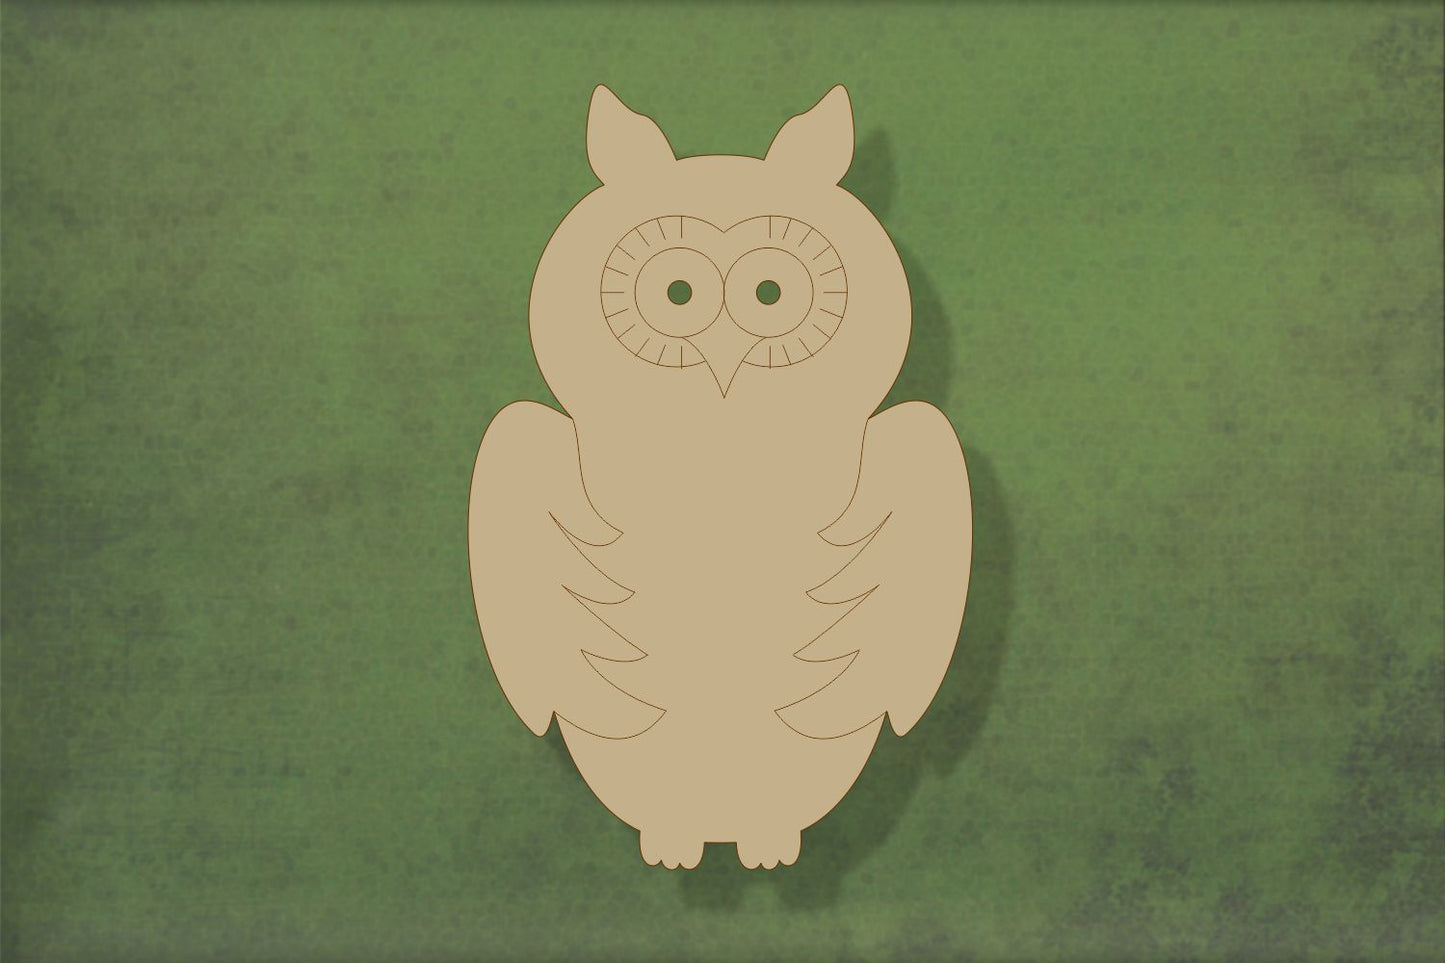 Laser cut, blank wooden Owl 2 with etched detail shape for craft